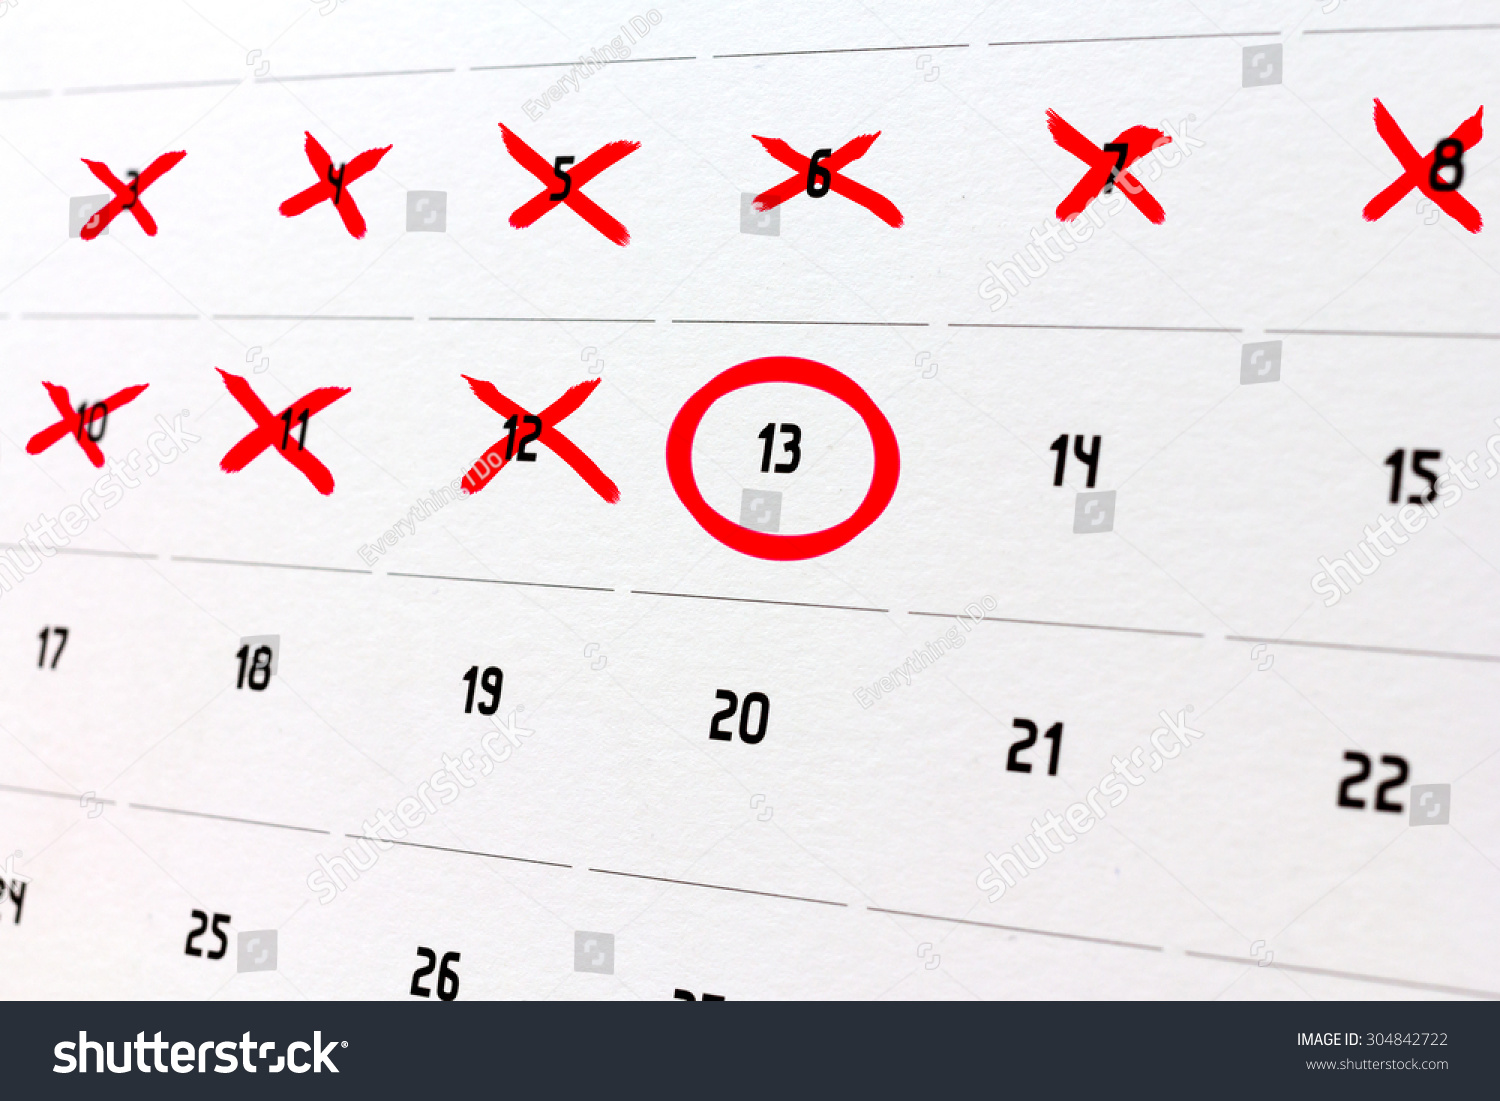 Counting Down The Days On A Calendar Stock Photo 304842722 Shutterstock